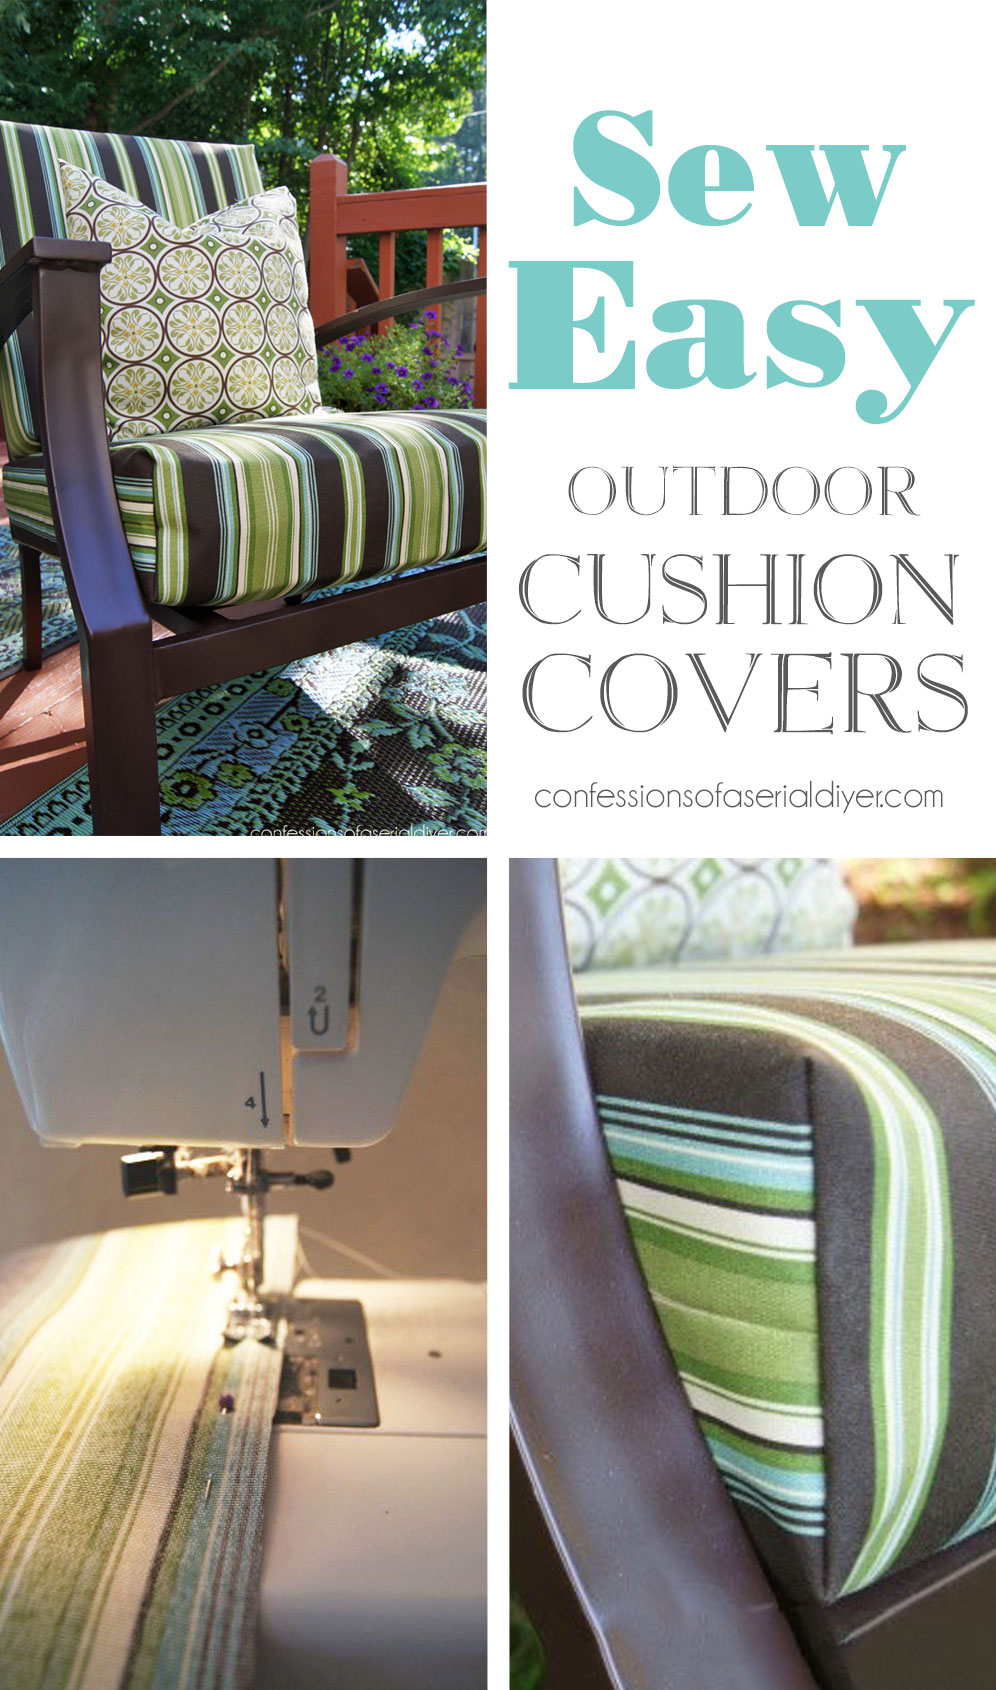 Sew Easy Outdoor Cushion Covers, How To Recover Outdoor Sofa Cushions